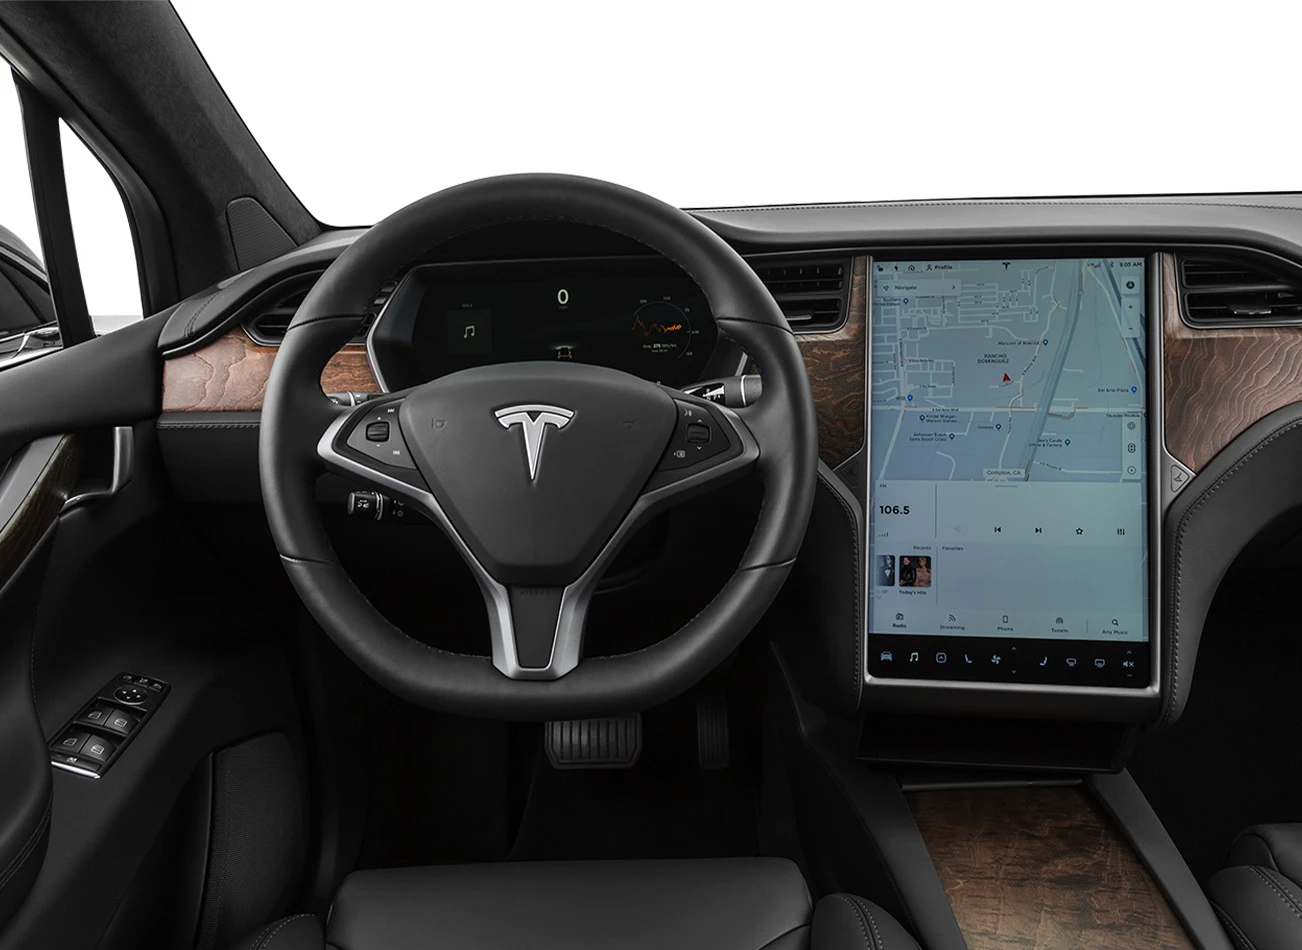 2020 Tesla Model X Review: Steering wheel and entertainment screen | CarMax